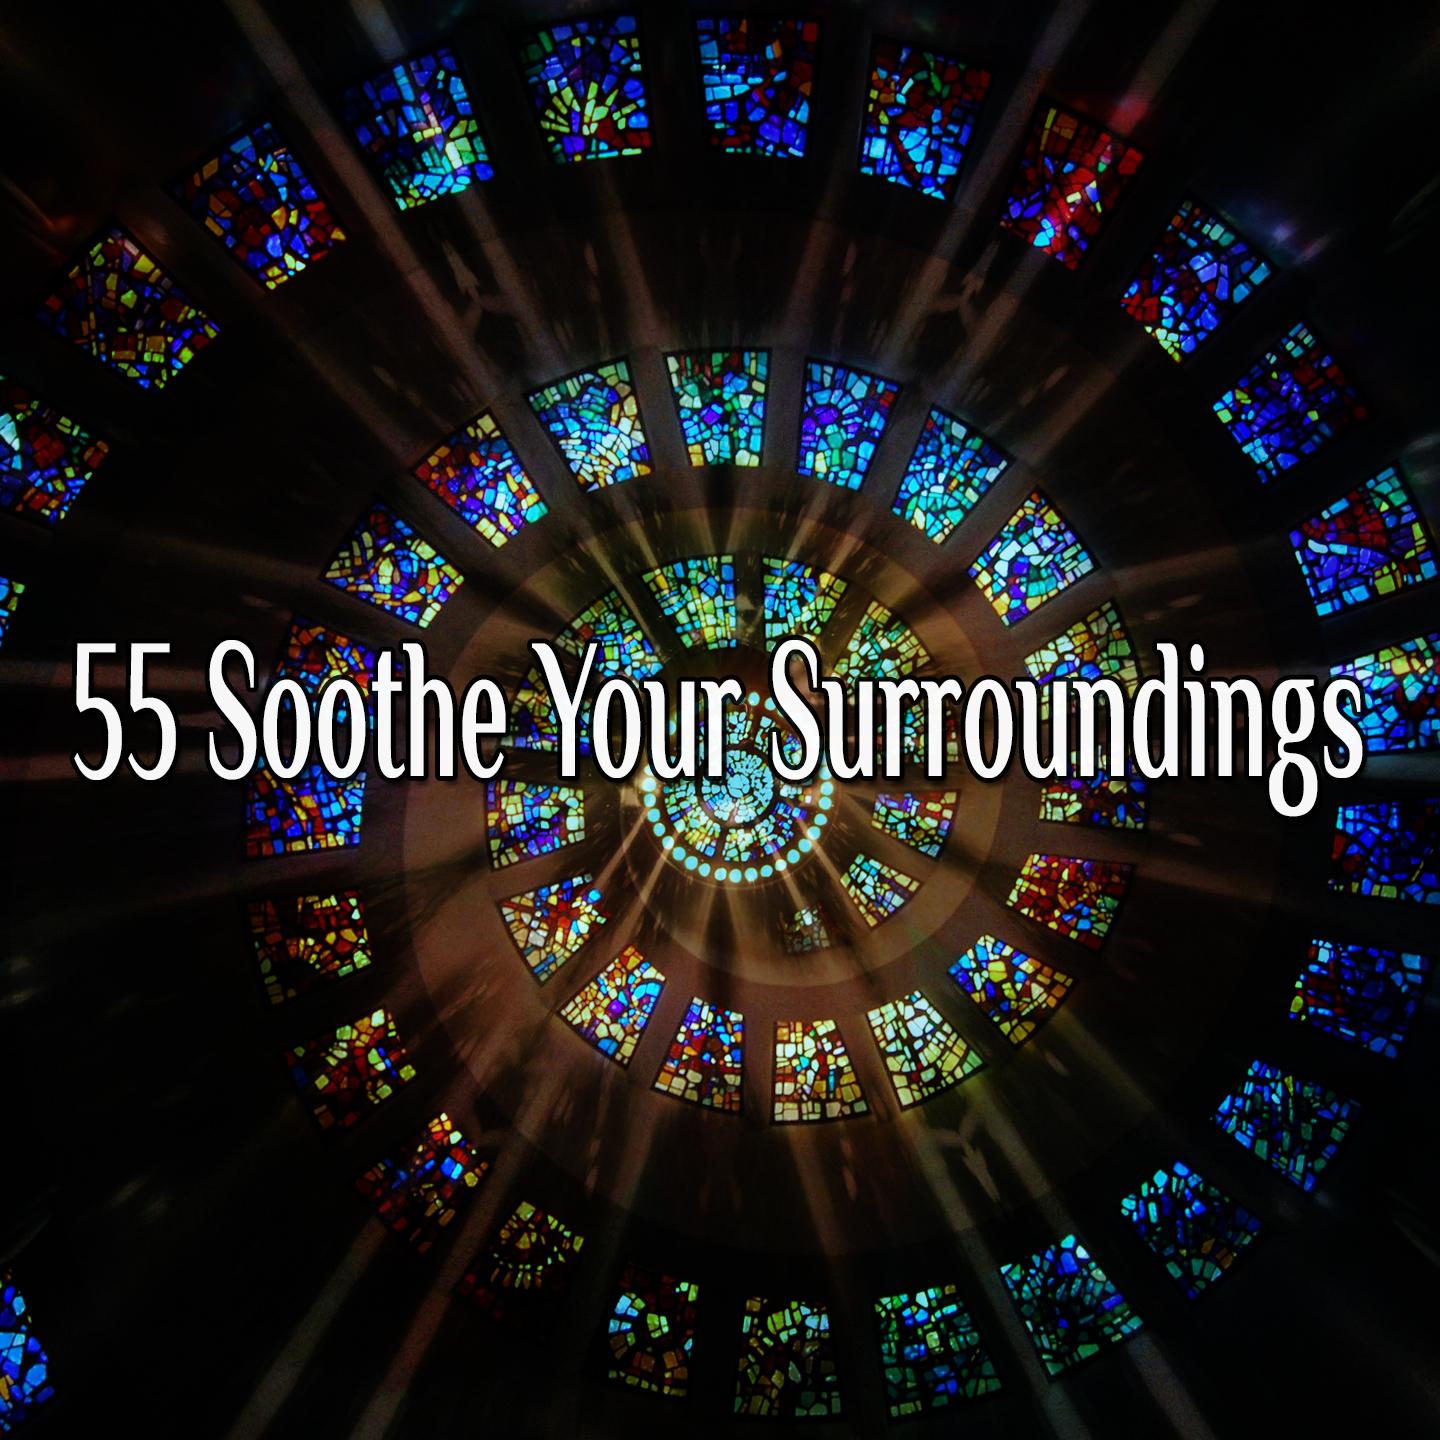 55 Soothe Your Surroundings